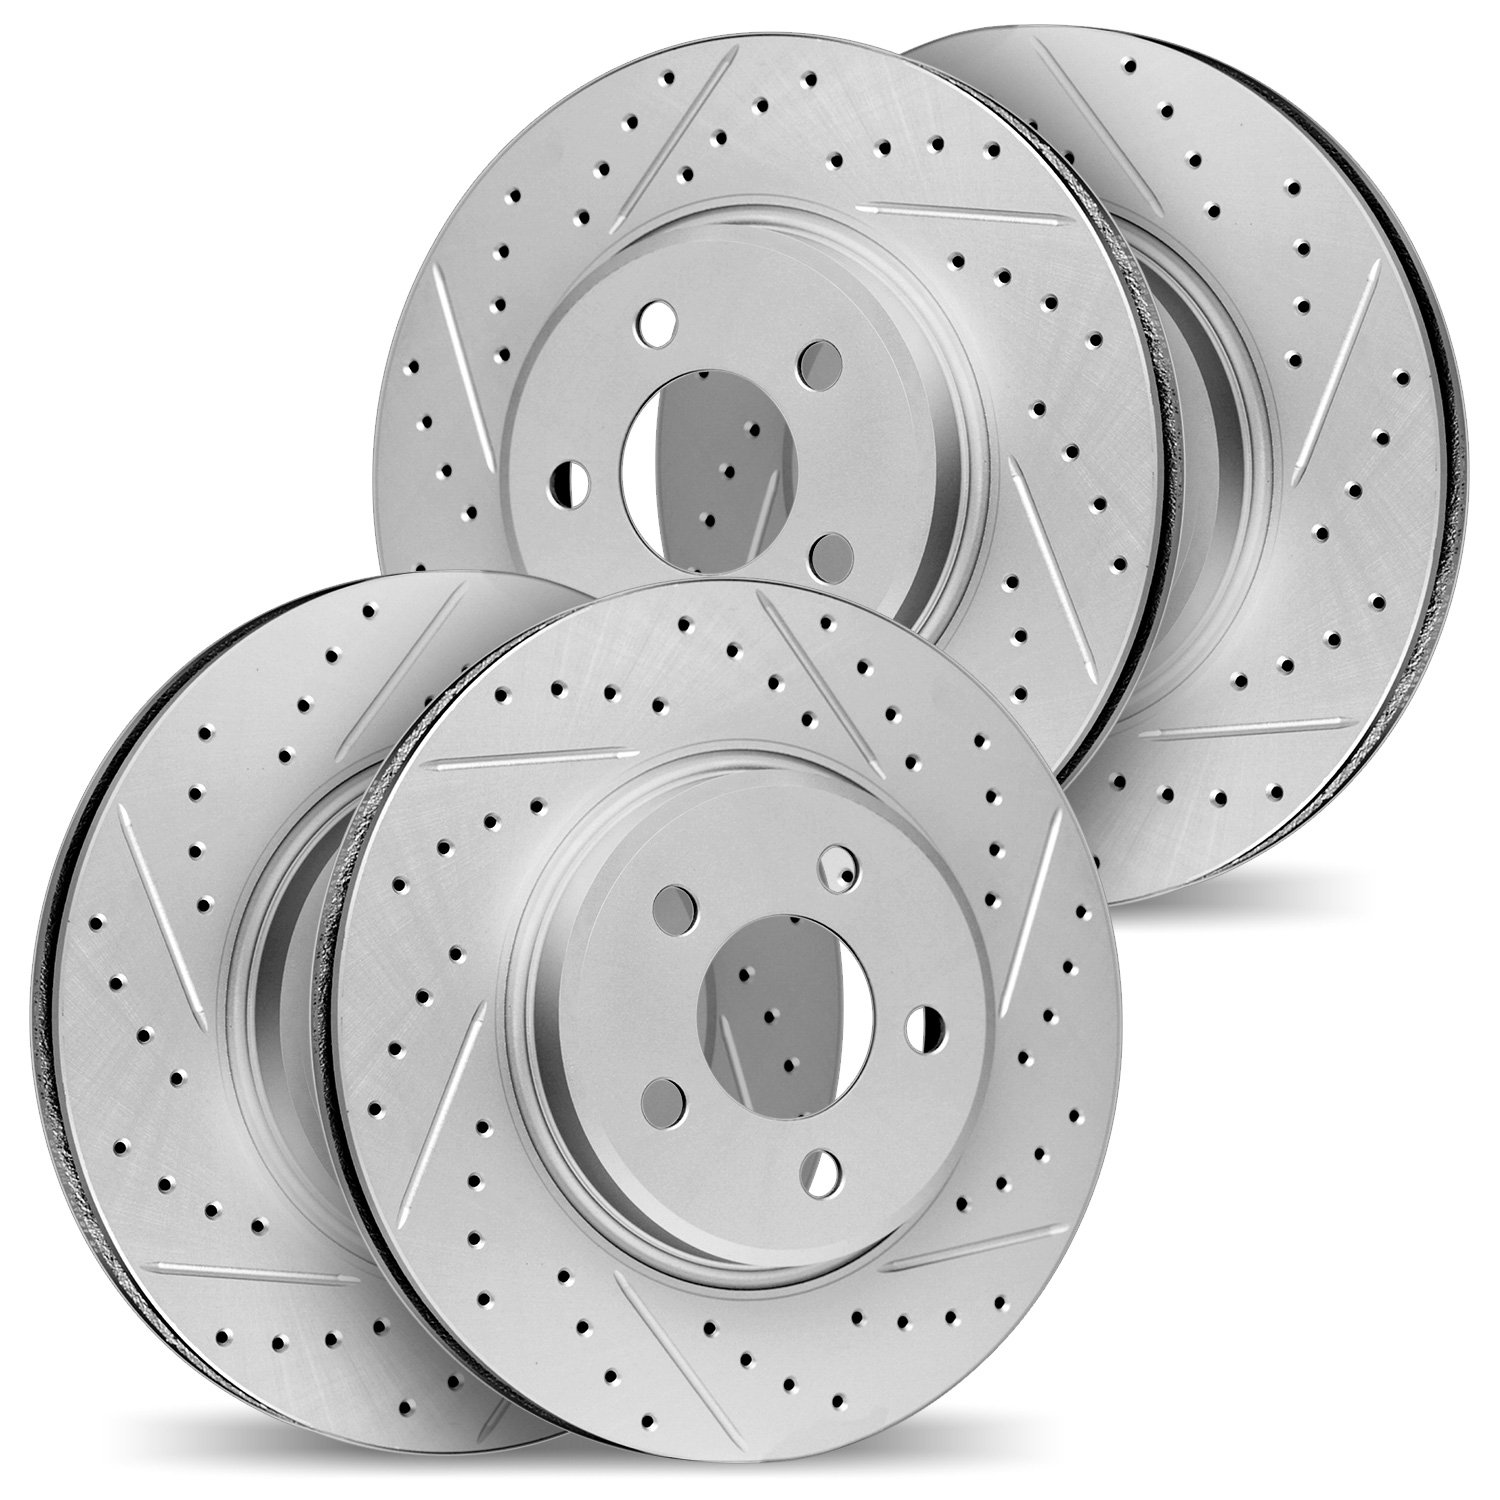 2004-26002 Geoperformance Drilled/Slotted Brake Rotors, Fits Select Tesla, Position: Front and Rear